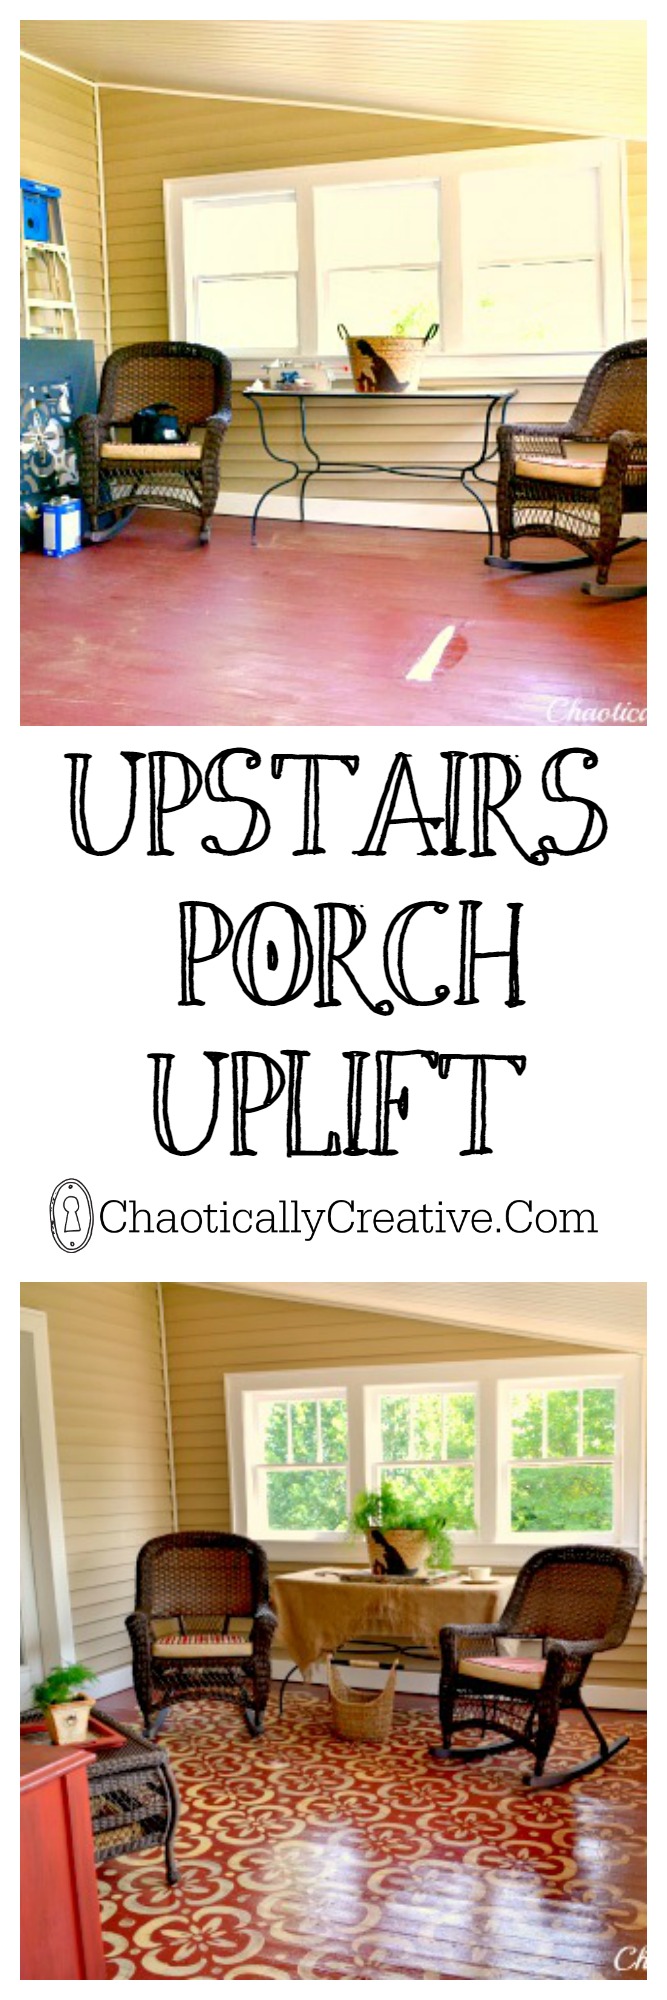 Upstairs Porch Uplift Collage